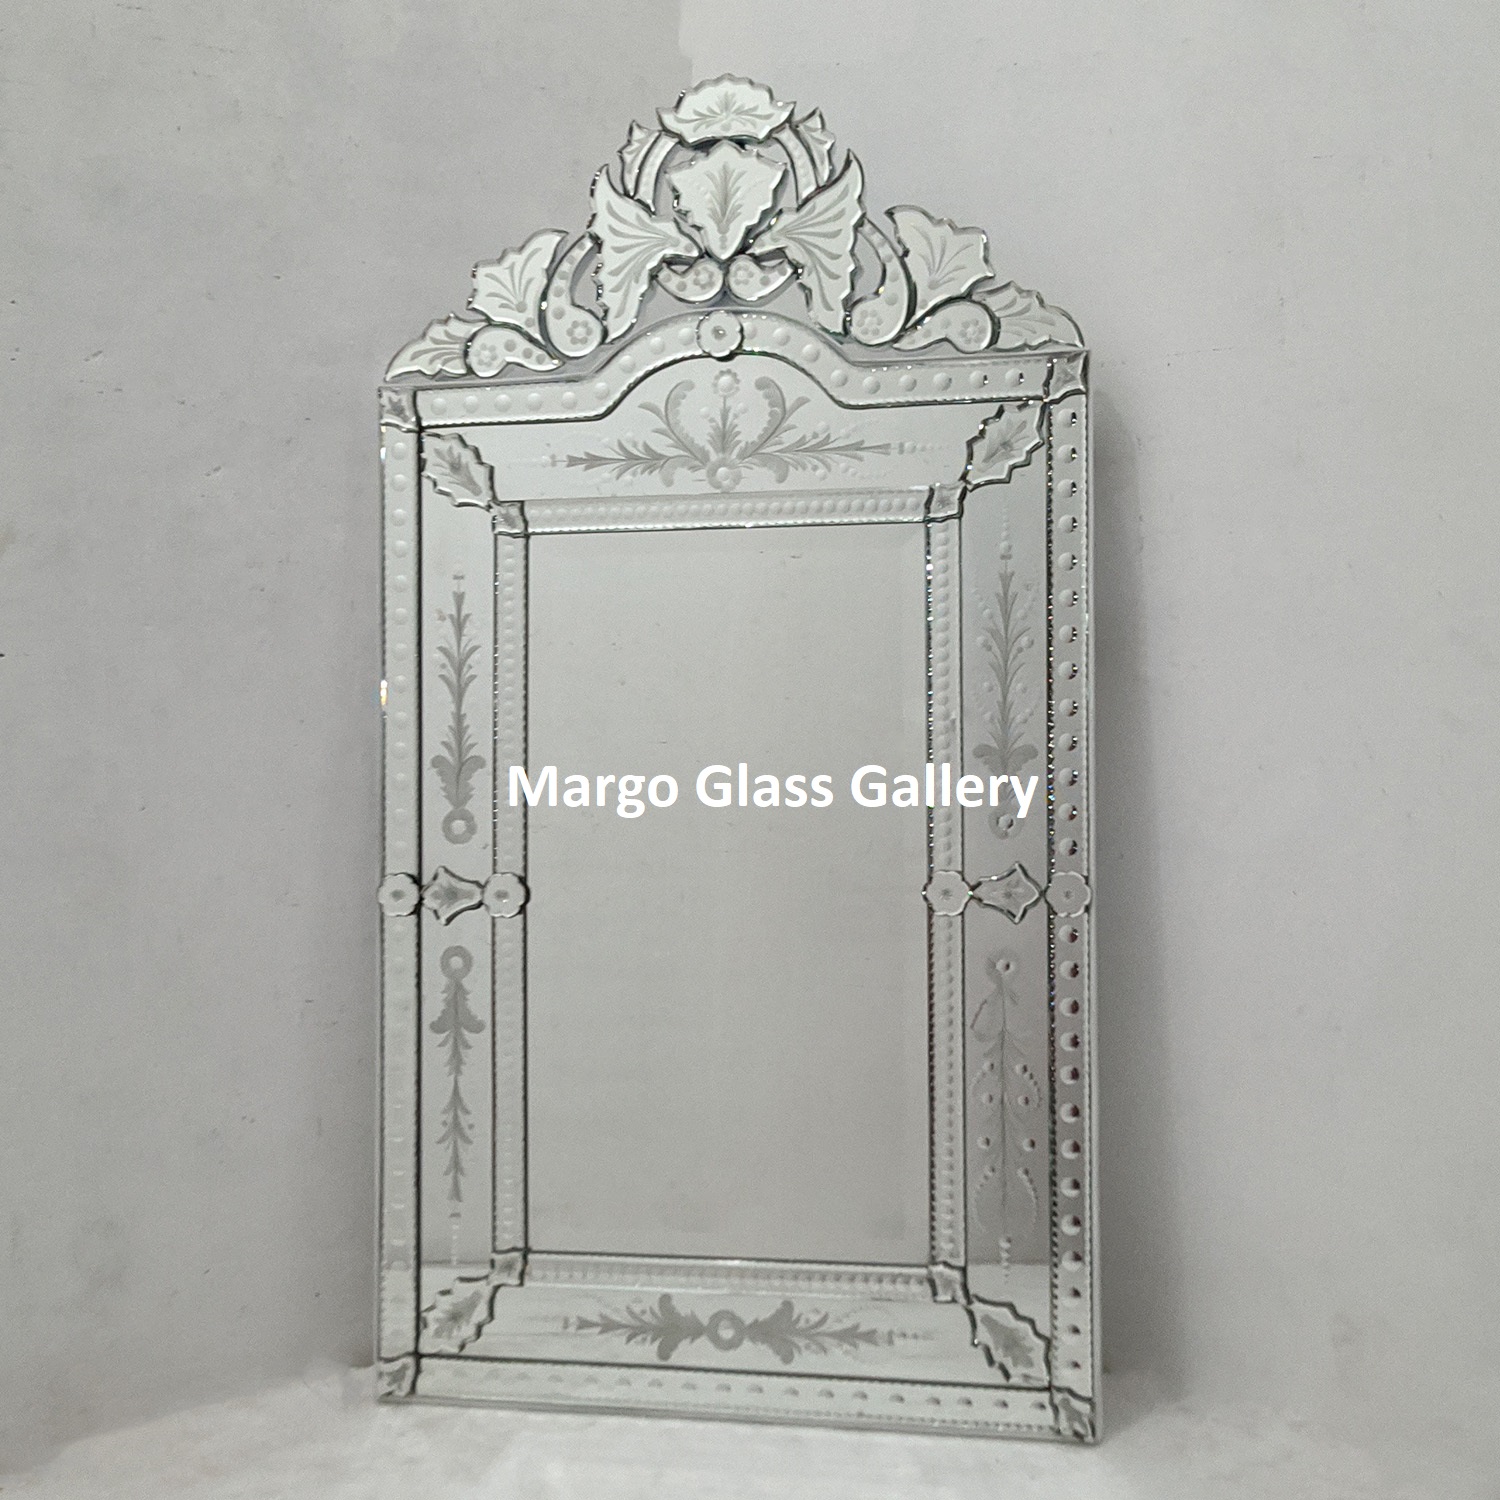 The function of the exclusive Venetian Wall Mirror